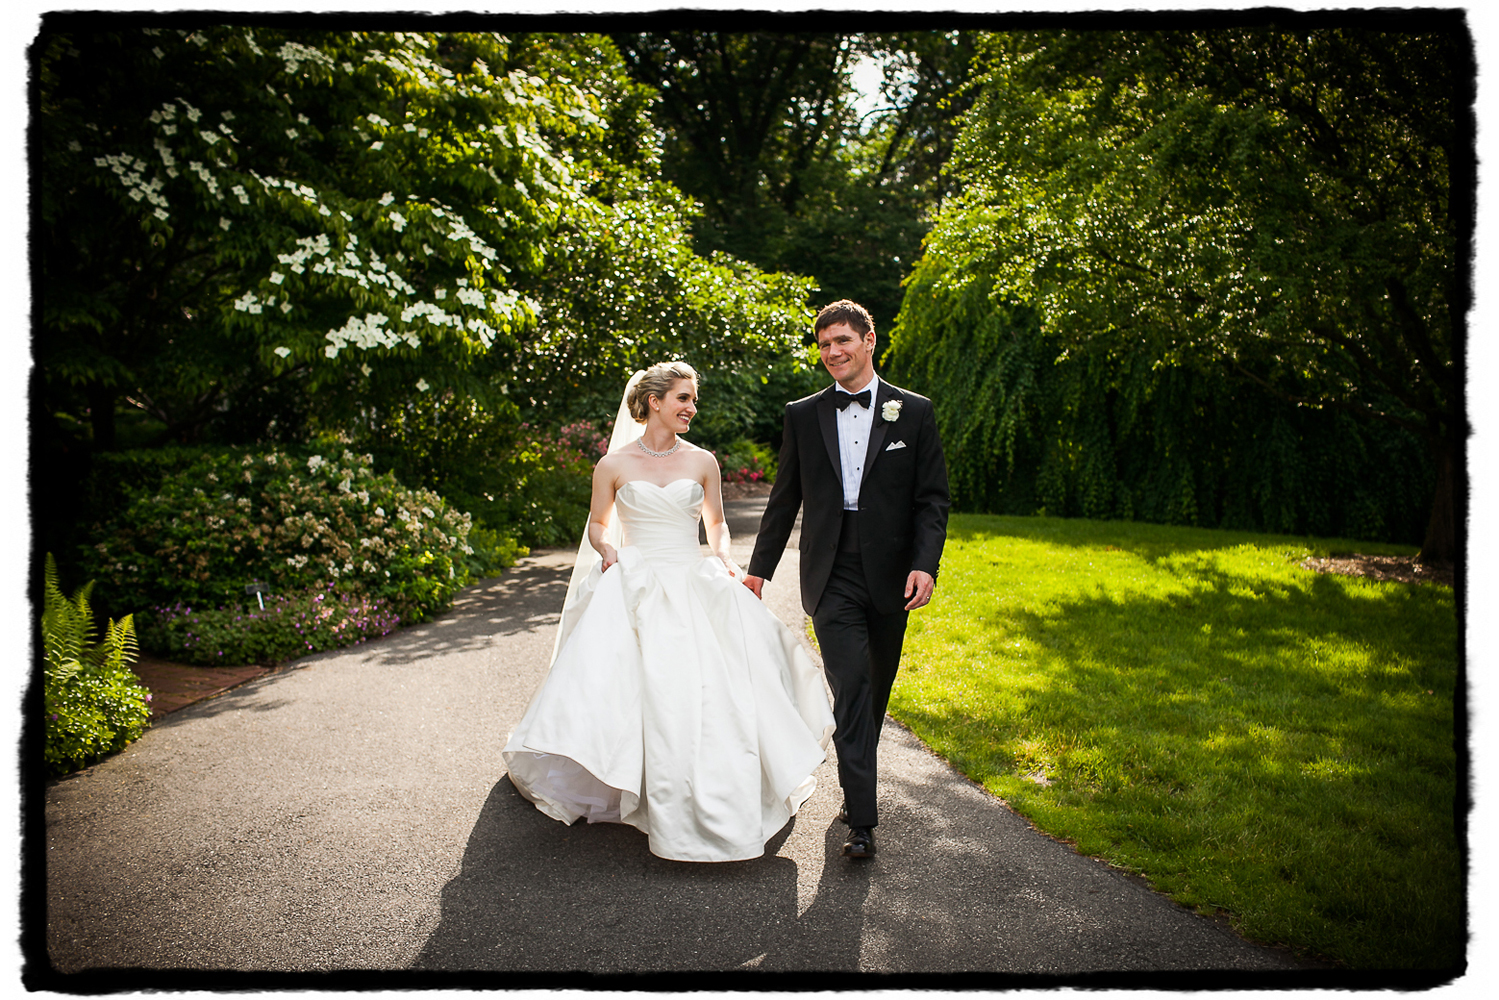 Sarah and Chris were picture perfect on their wedding day, shown here strolling through Freylinghuysen Arboretum.